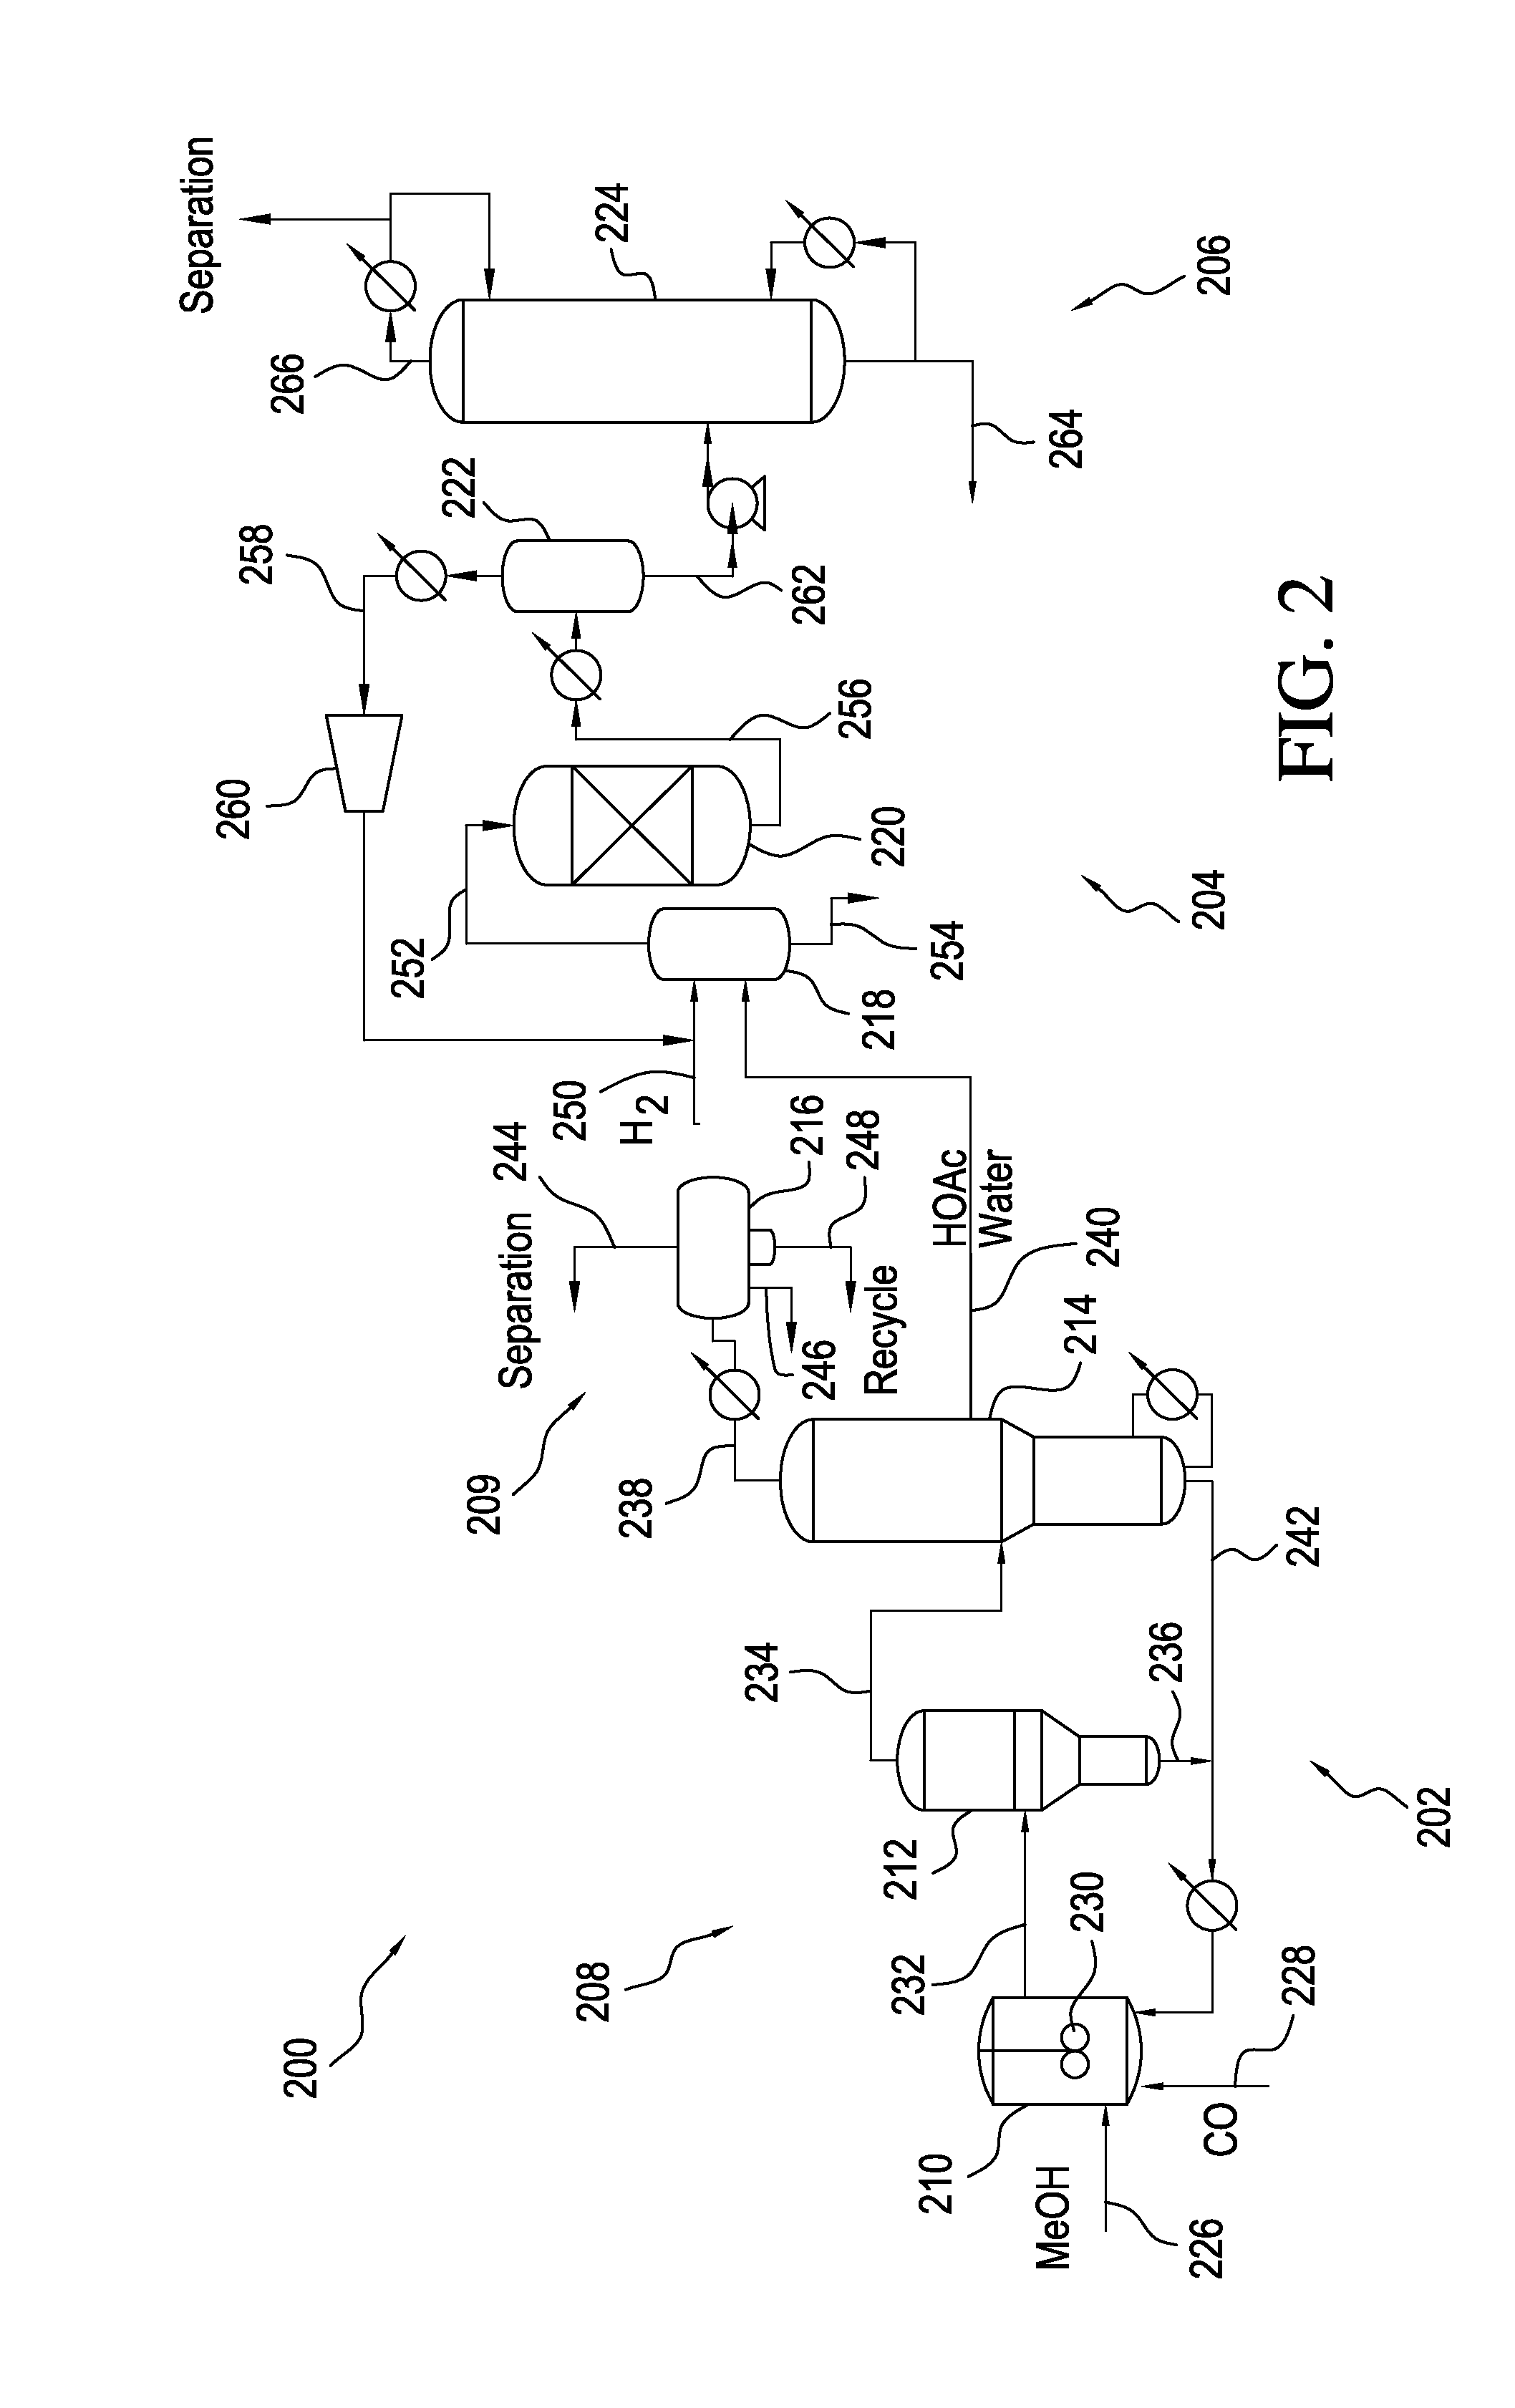 Alcohol production process integrating acetic acid feed stream comprising water from carbonylation process